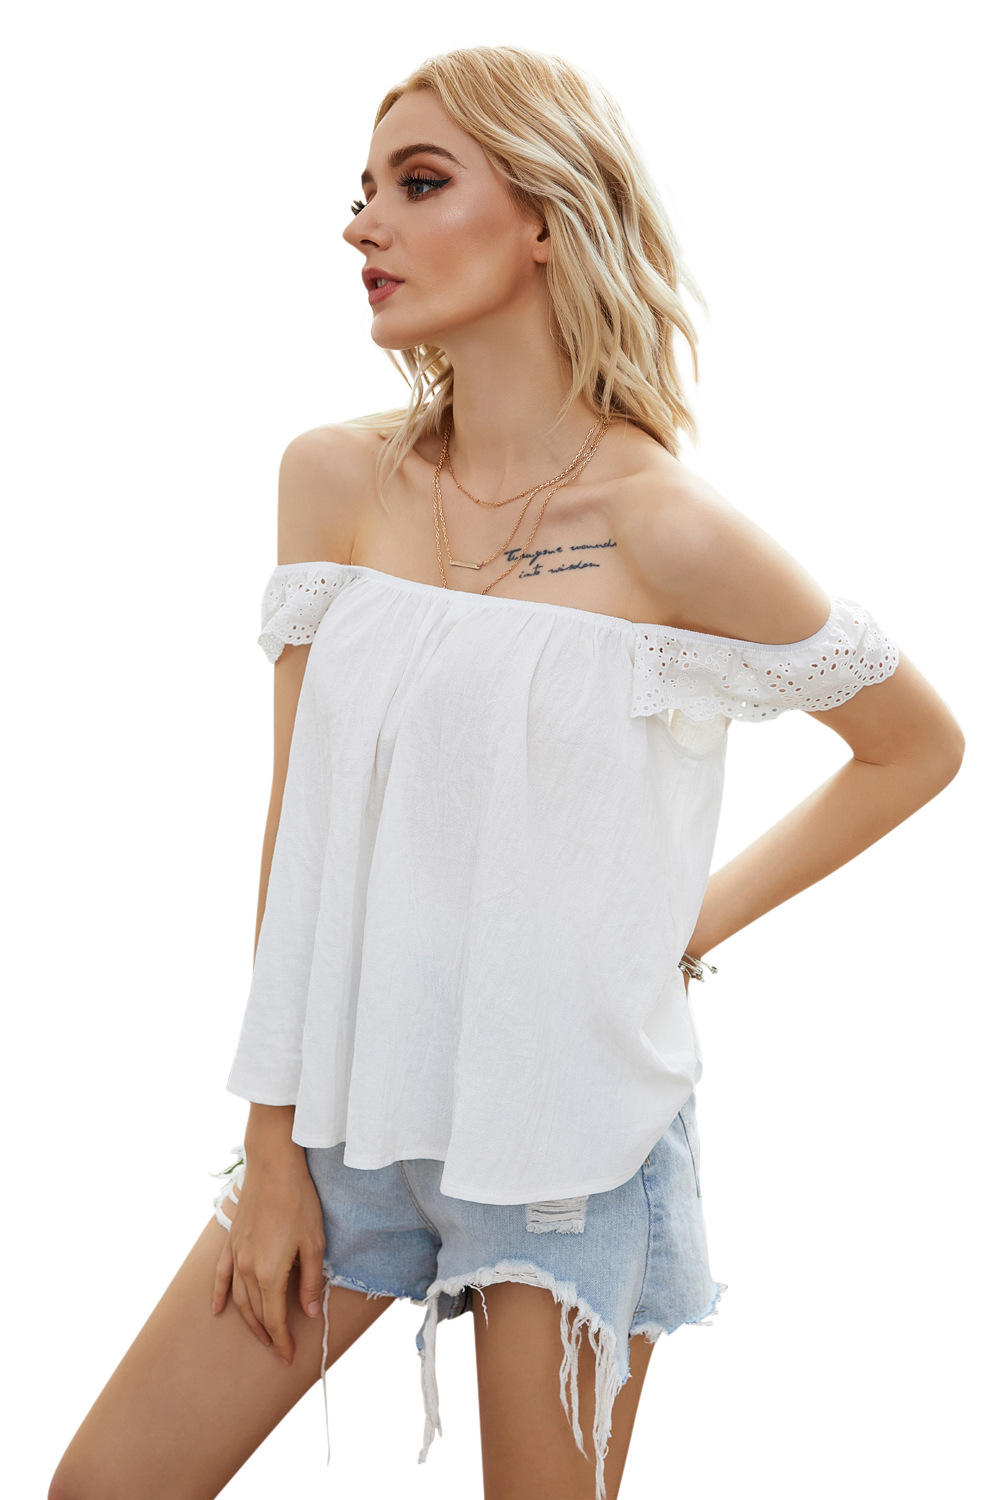 white vest sling lotus leaf lace shirt inside and outside wear home casual top NSDF1537